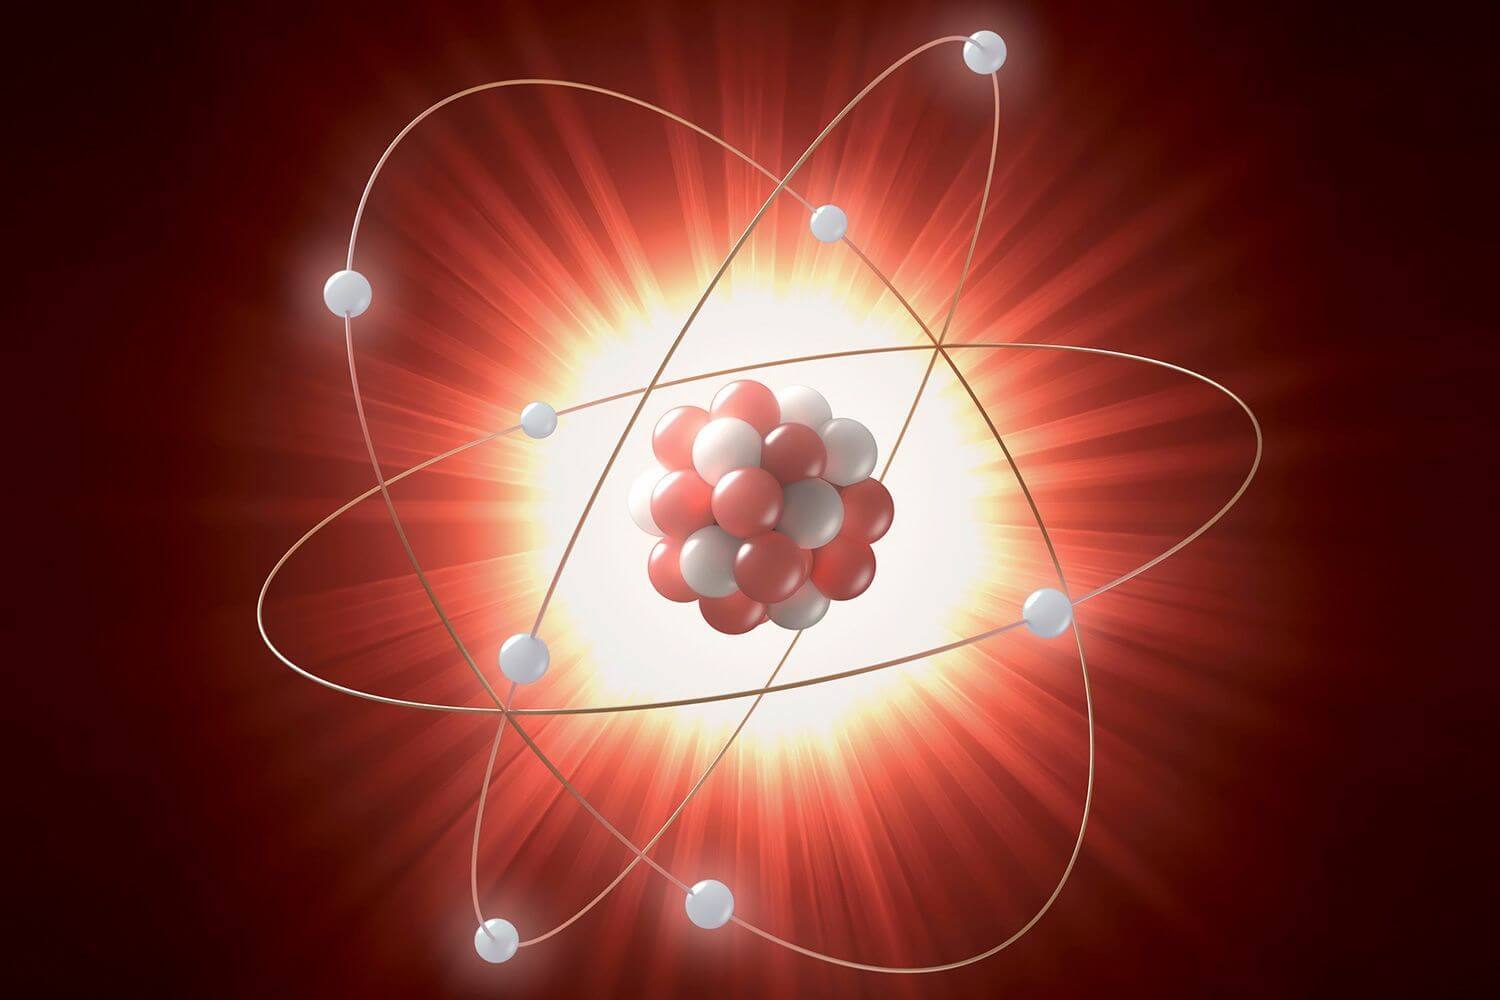 Why are scientists concerned about the problem of an atom?